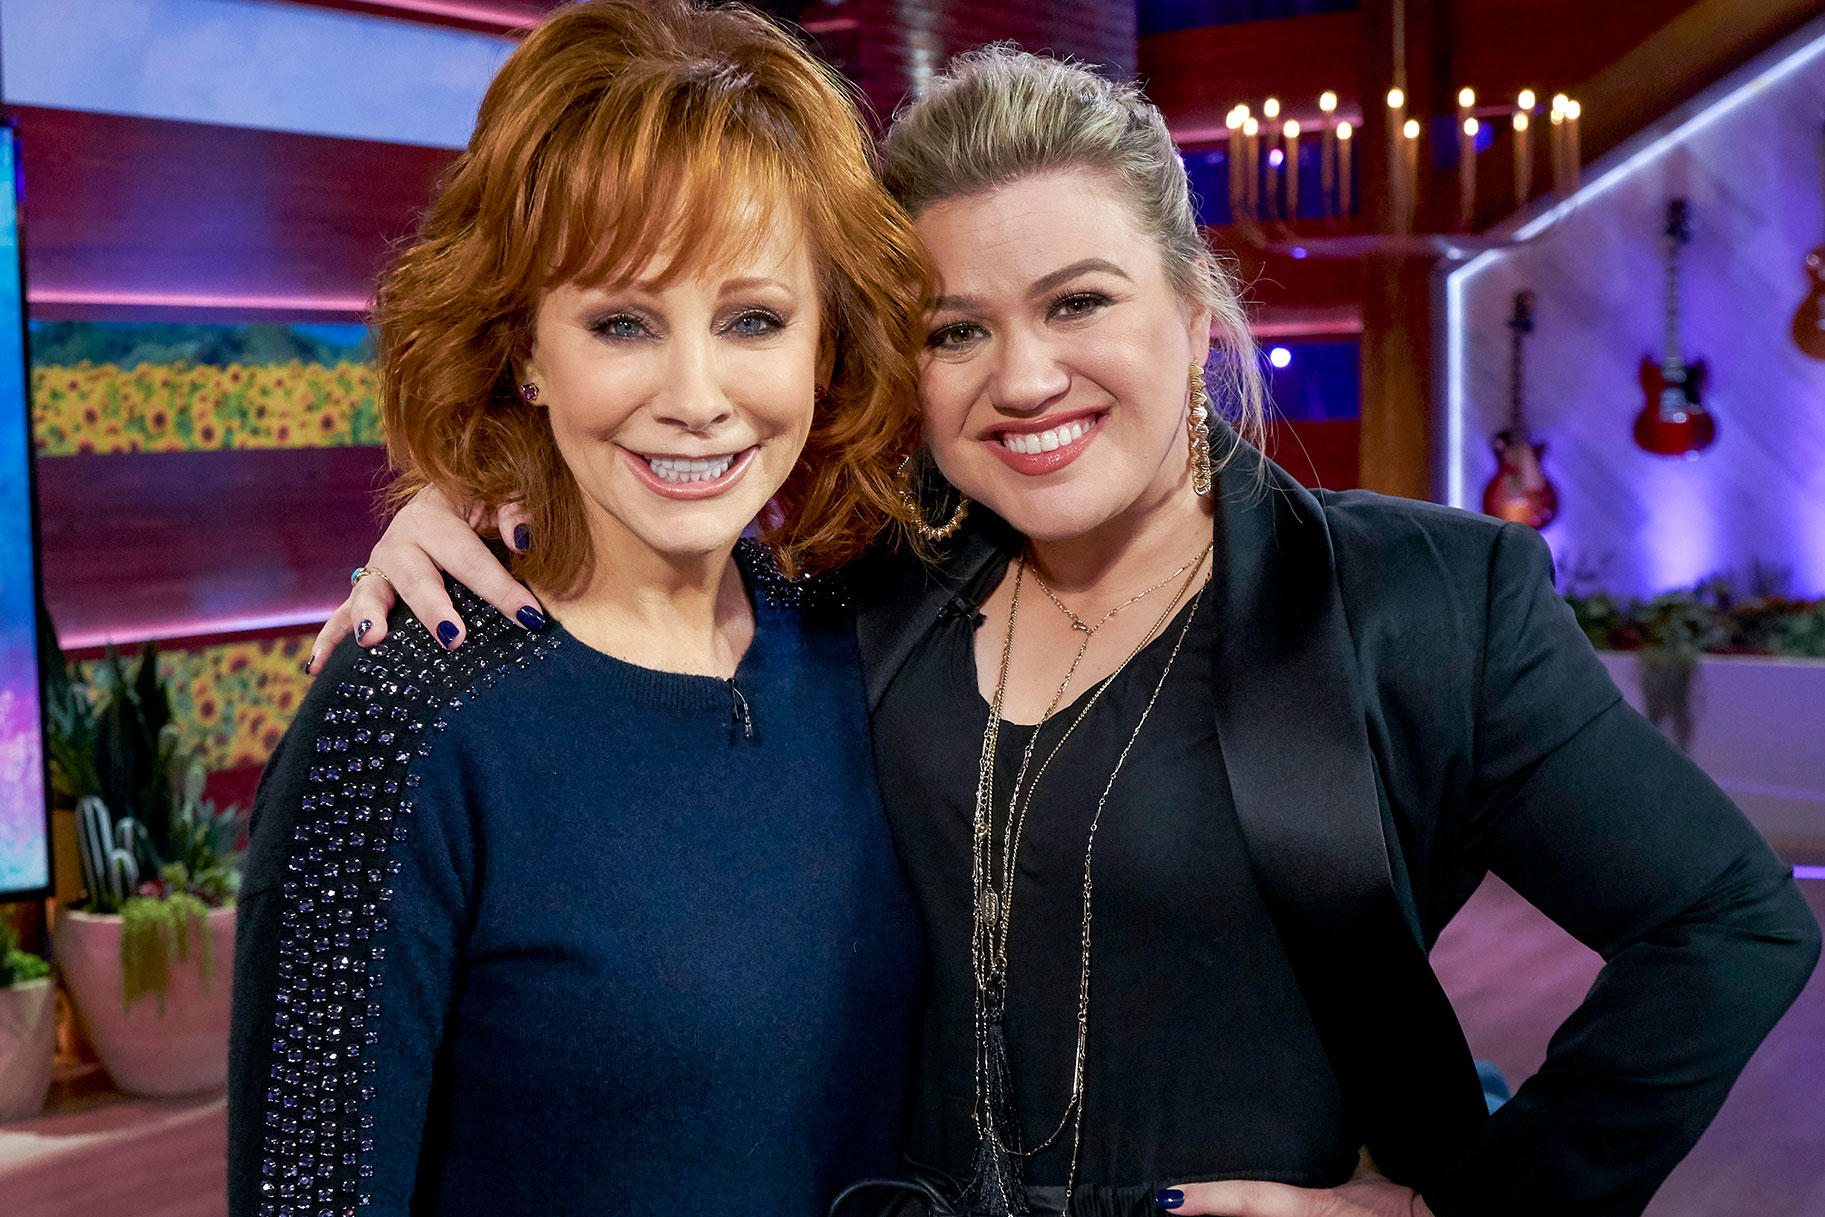 Kelly Clarkson and Reba hugging and smiling at the camera